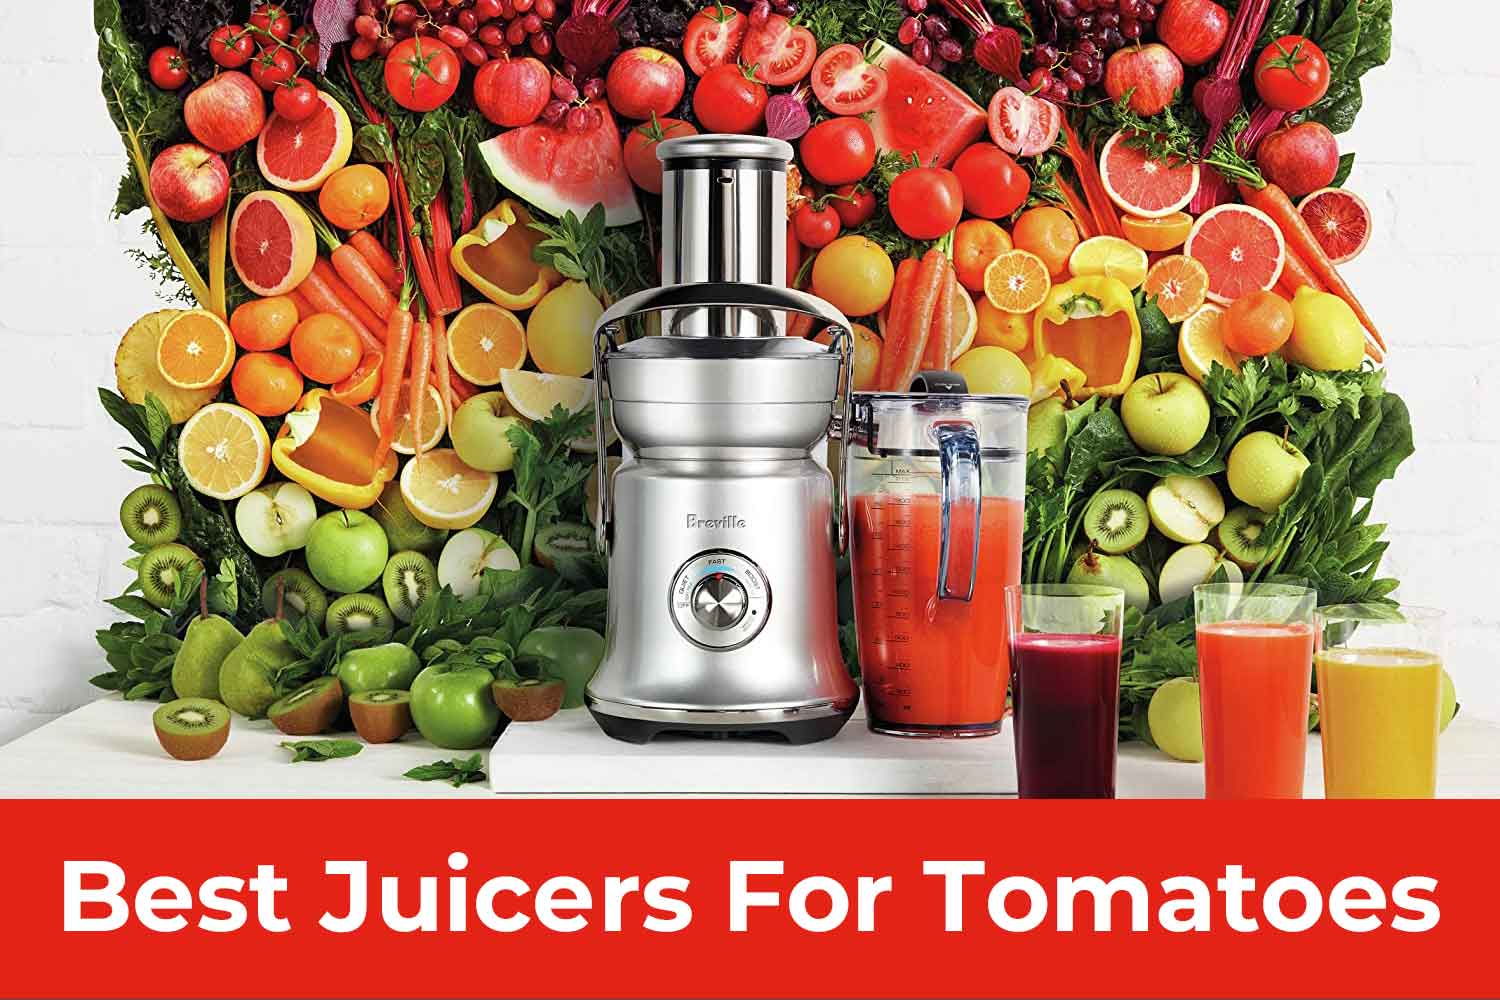 Best Juicers For Tomatoes